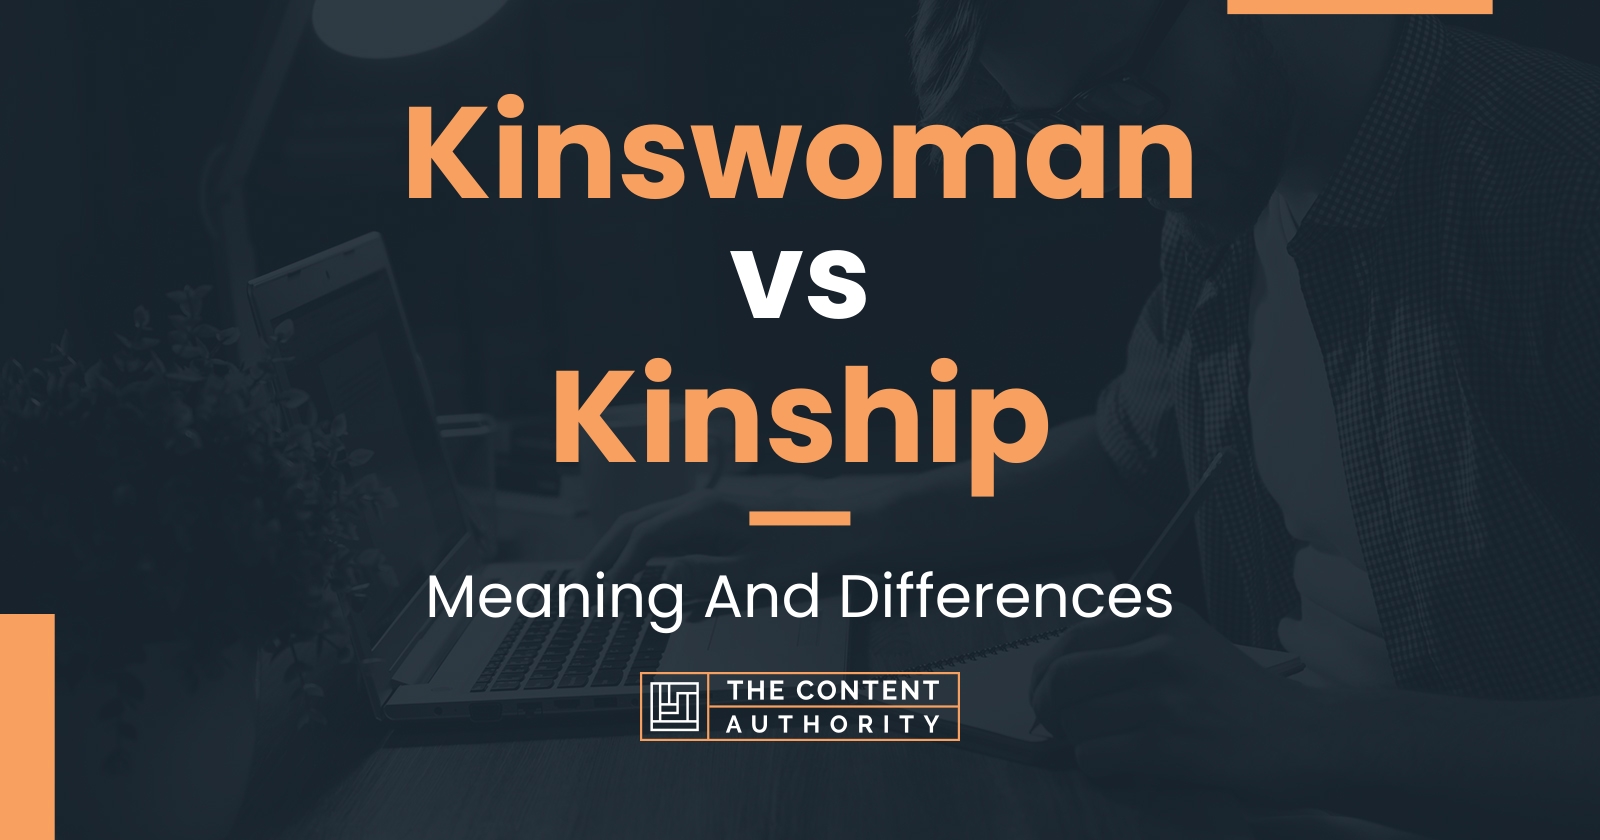 Kinswoman vs Kinship: Meaning And Differences